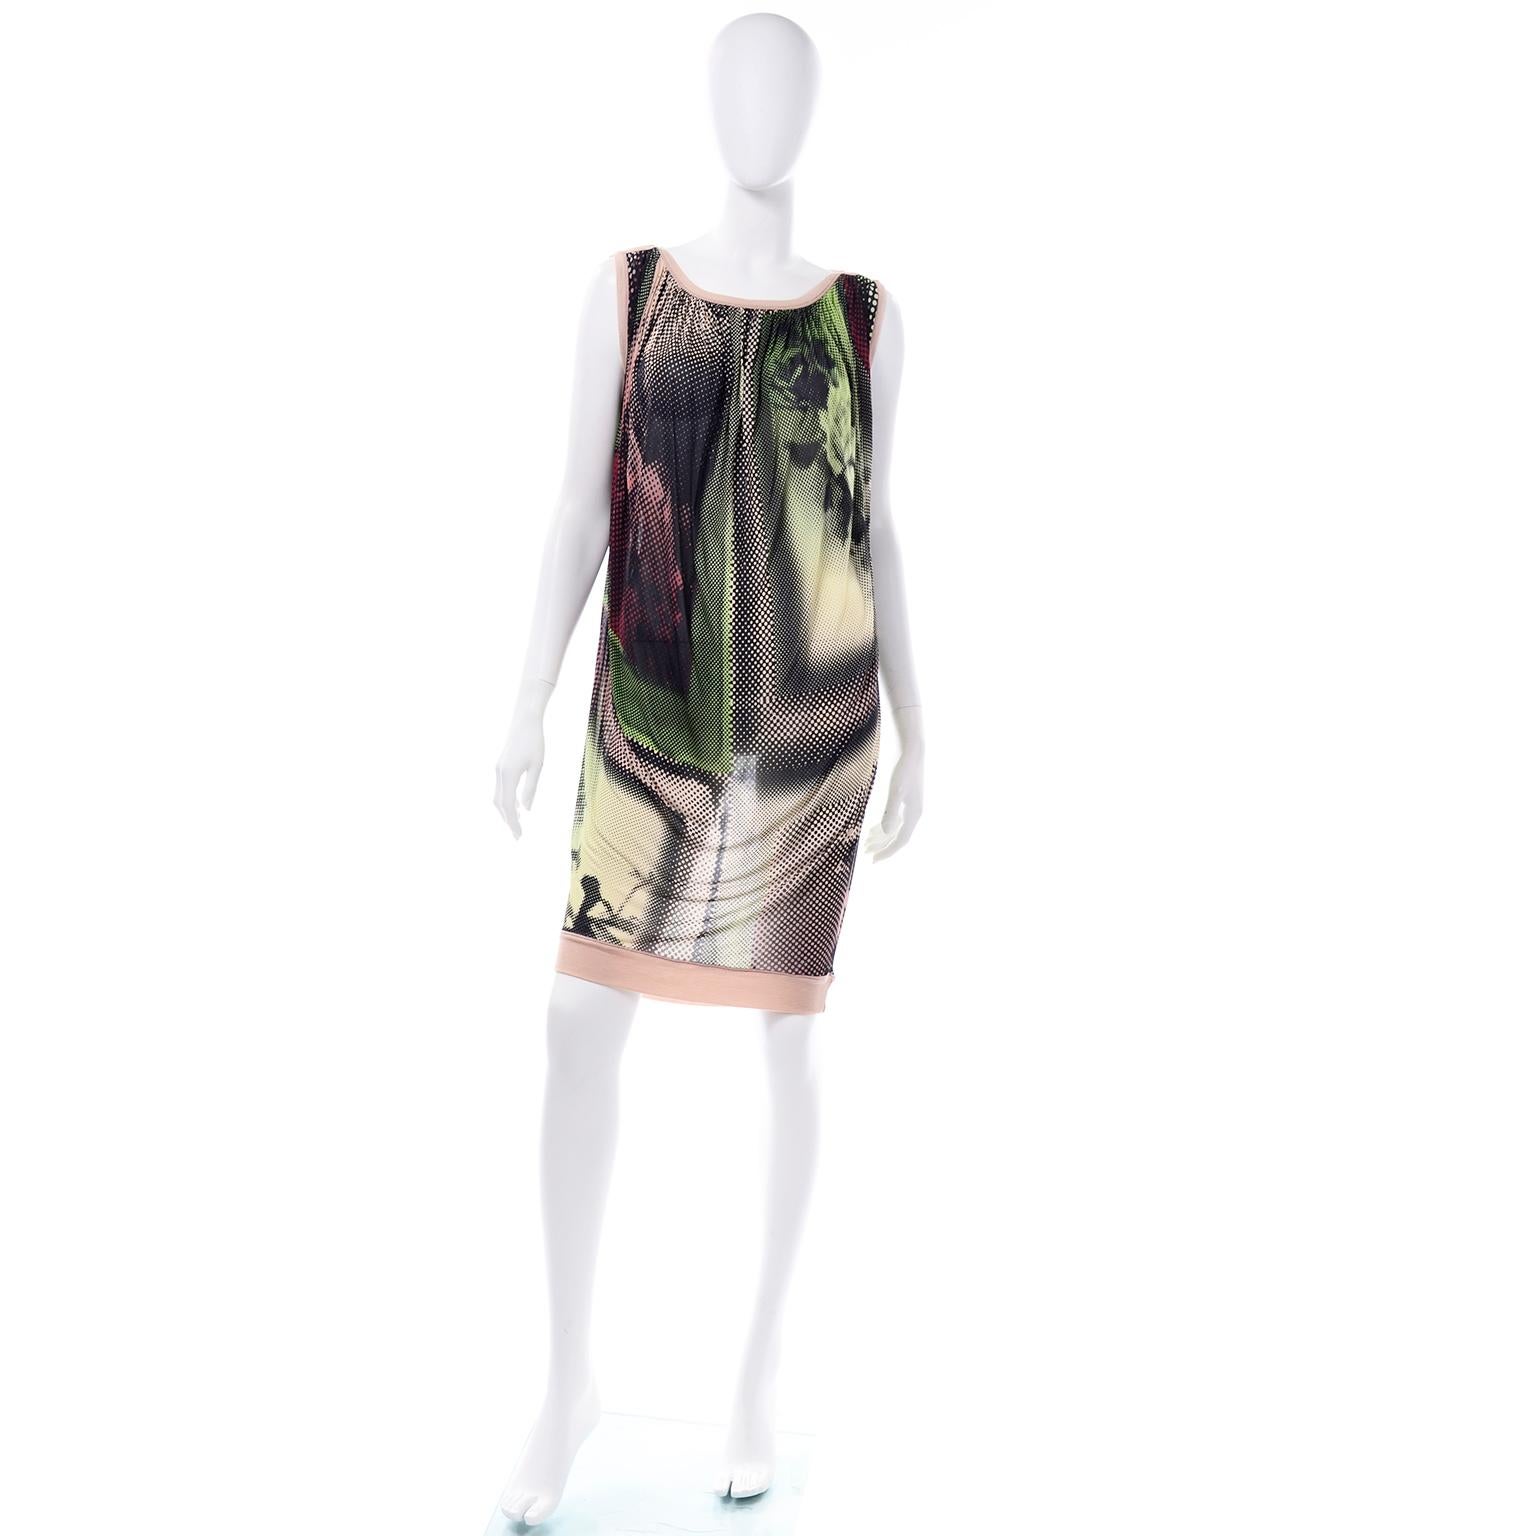 We are obsessed with this Jean Paul Gaultier enlarged photograph dot print op art sleeveless dress! This print is very unique and playful with colors in shades of  nude pink, lime green, mauve, rust, black, and pale yellow. The neckline is a